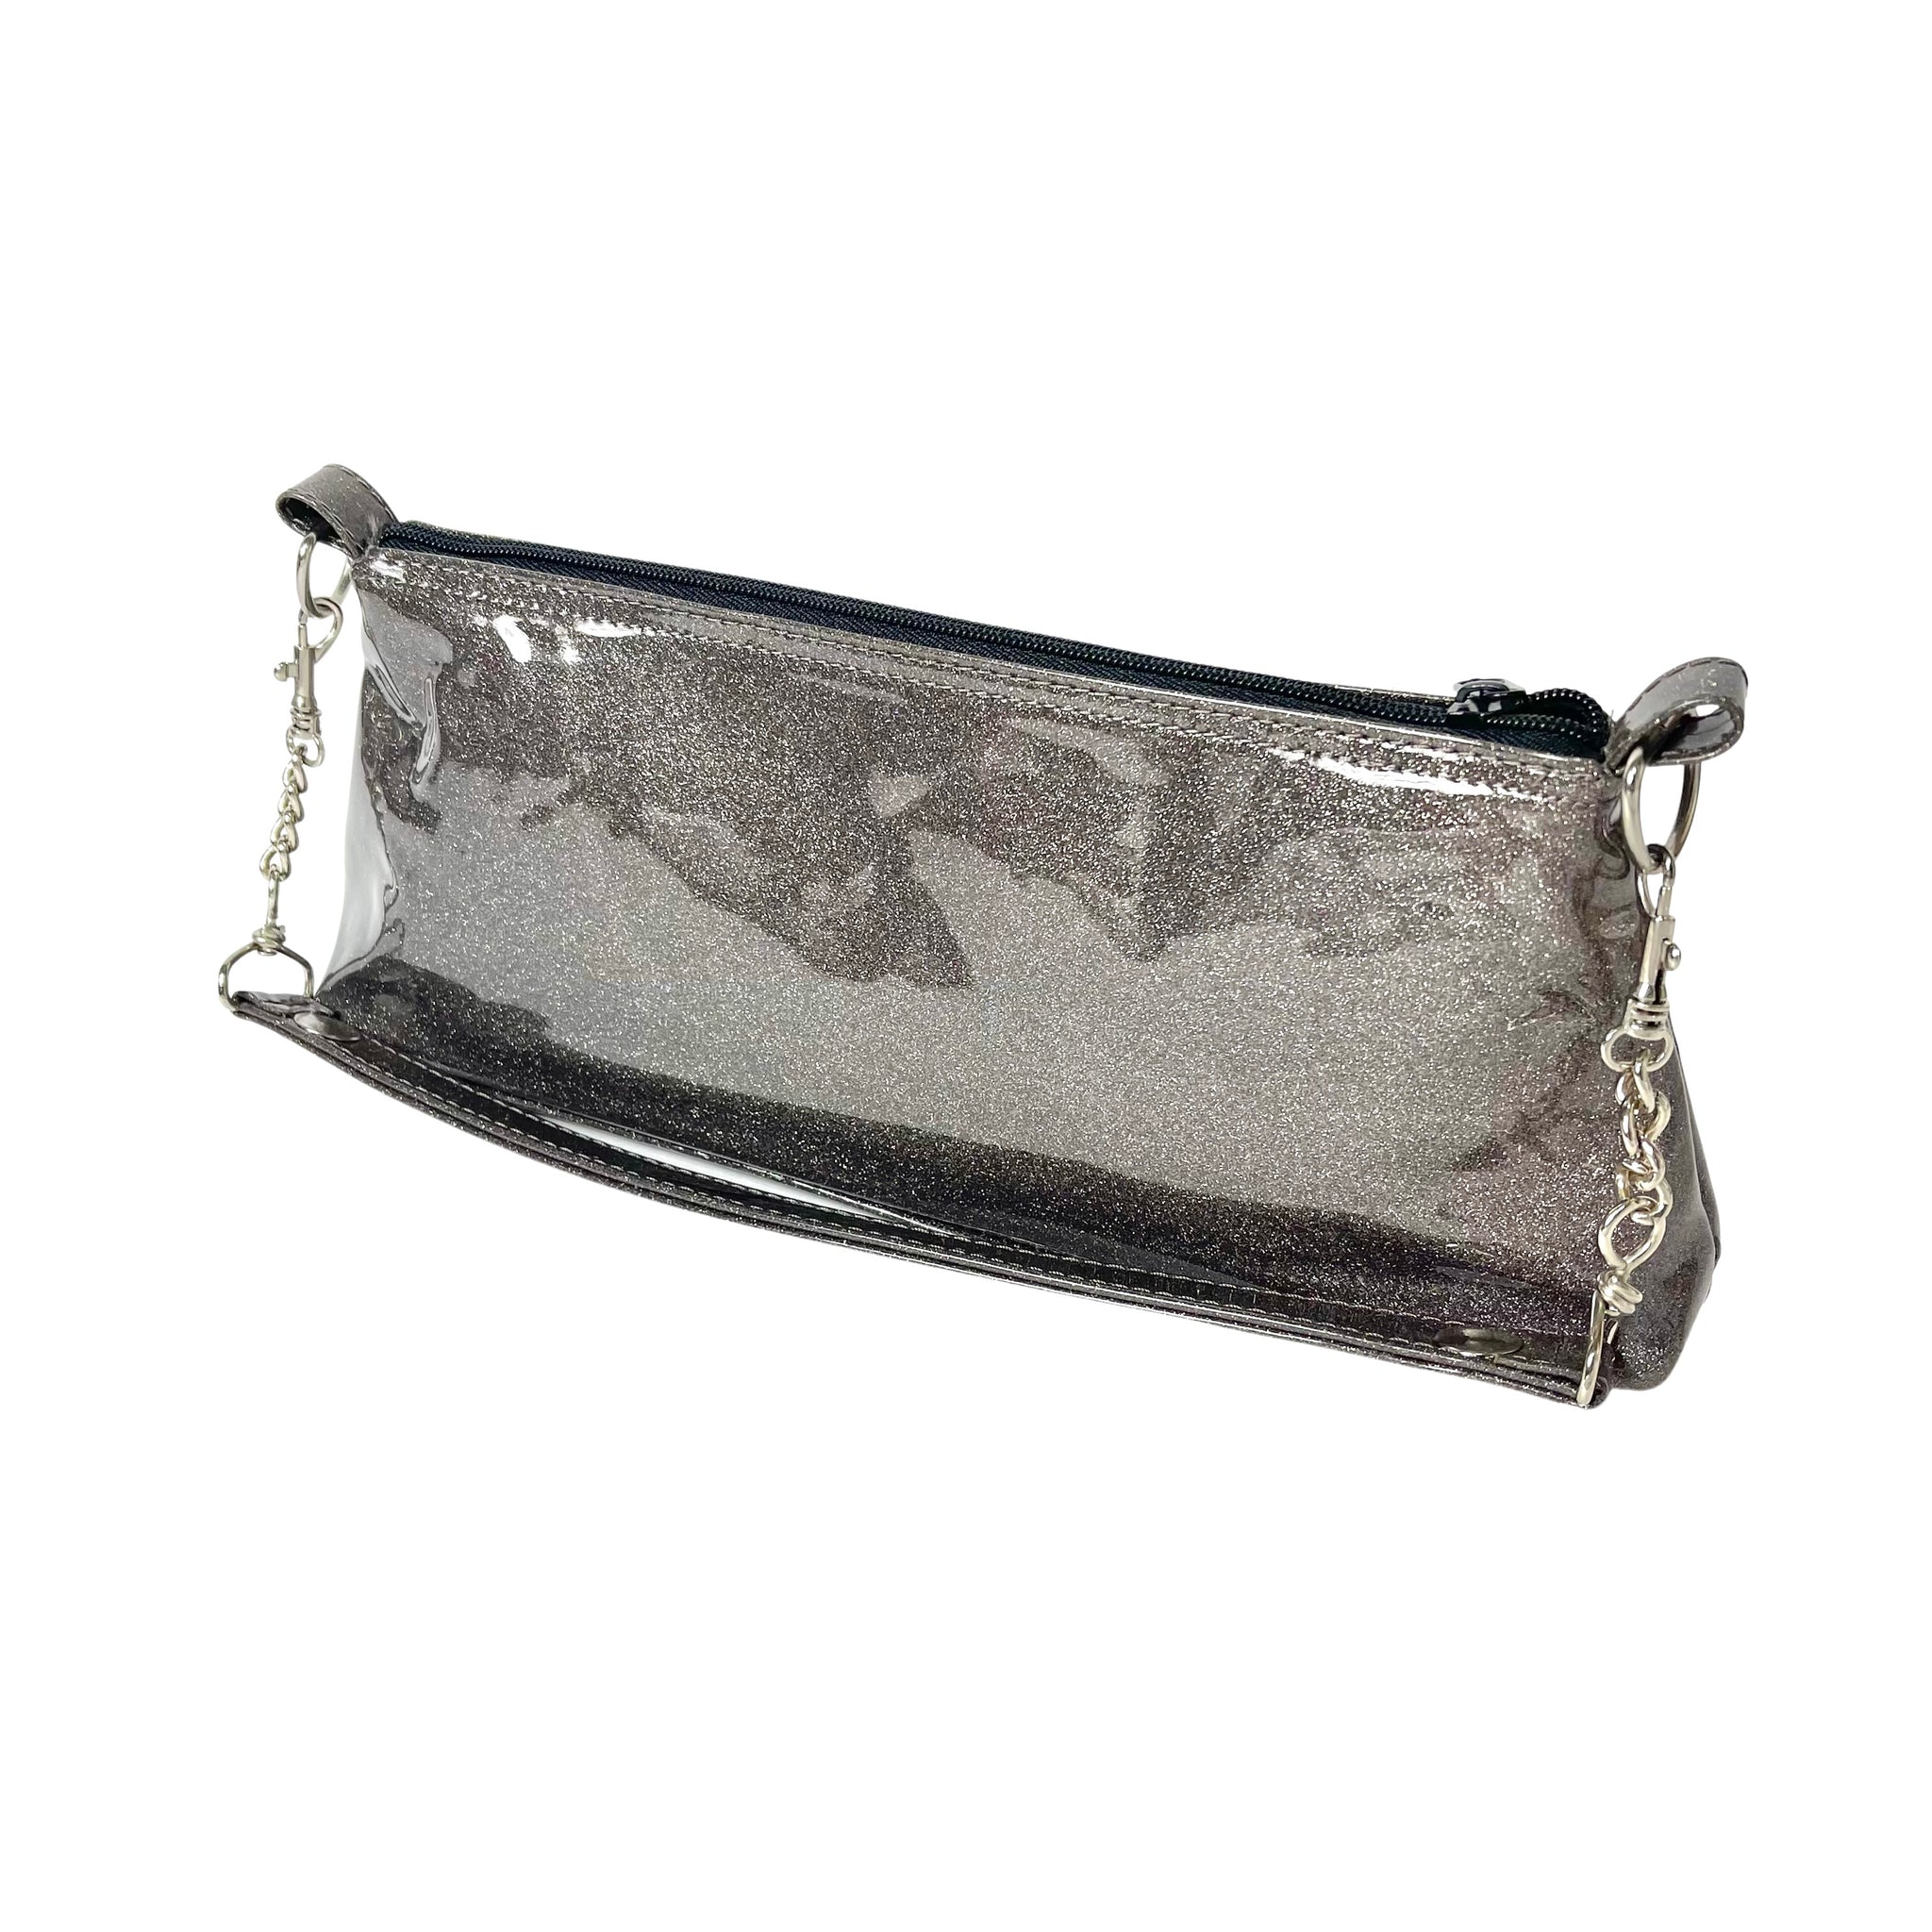 Sequin Heart Leather Purse in Black